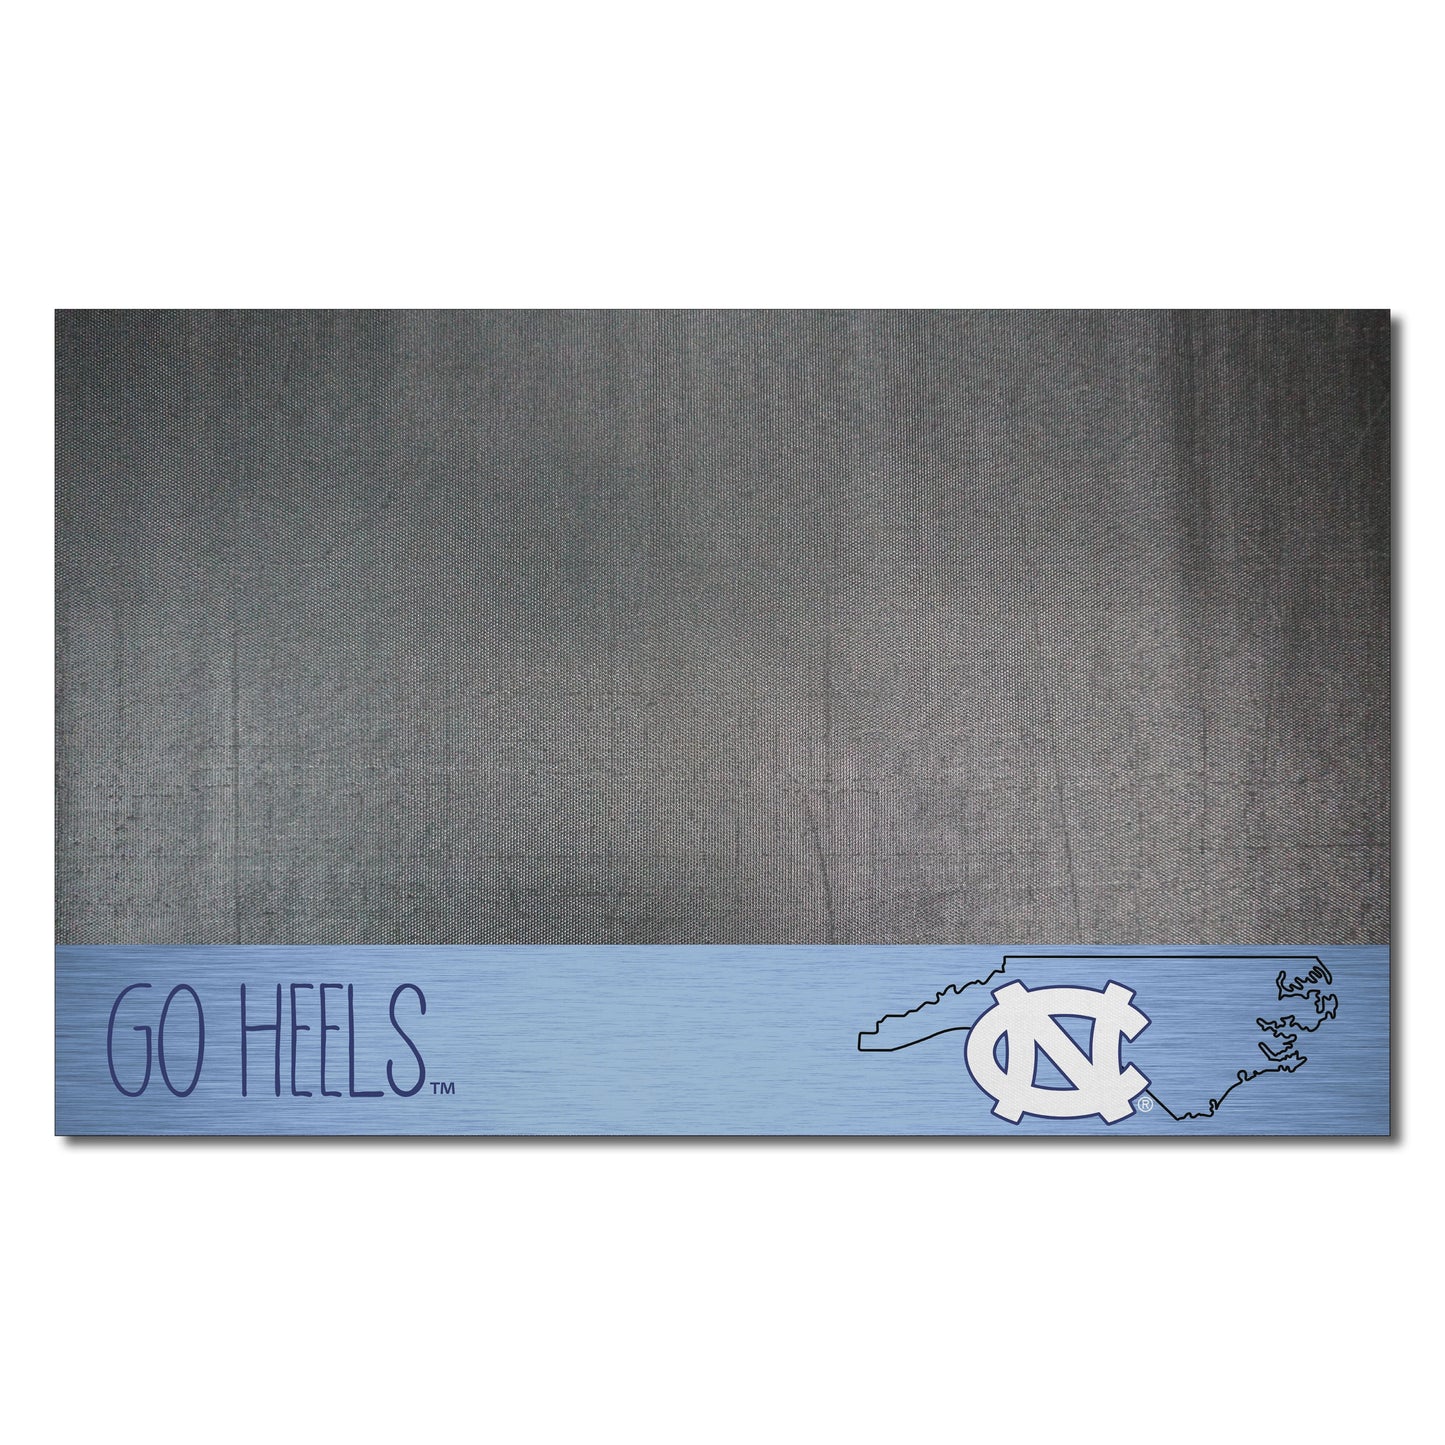 North Carolina Tar Heels Southern Style Grill Mat with NC Logo by Fanmats